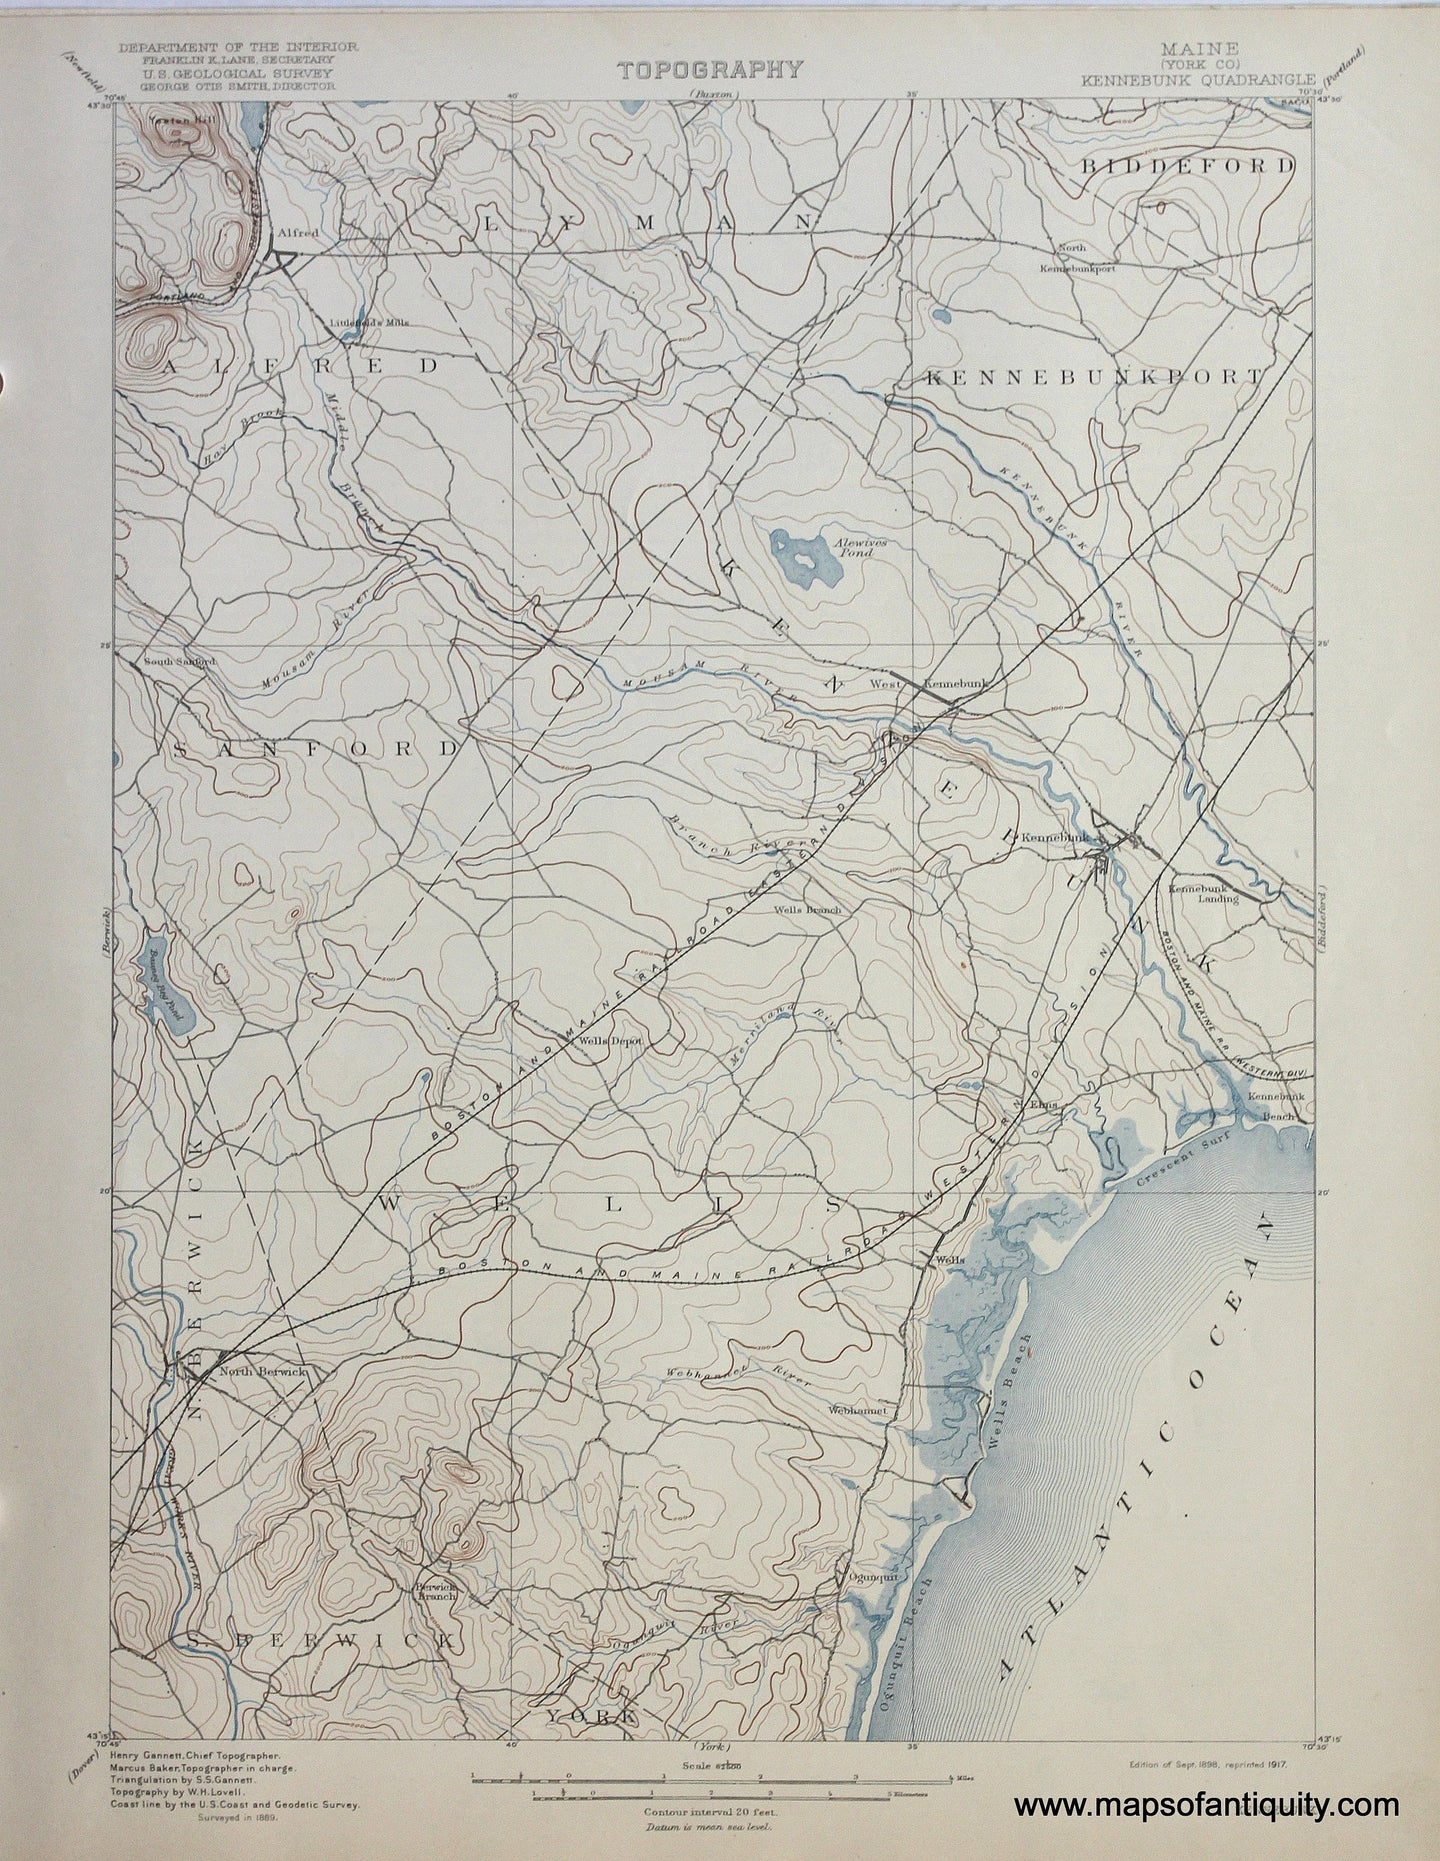 Genuine-Antique-Map-Kennebunk-Maine--1917-US-Geological-Survey--Maps-Of-Antiquity